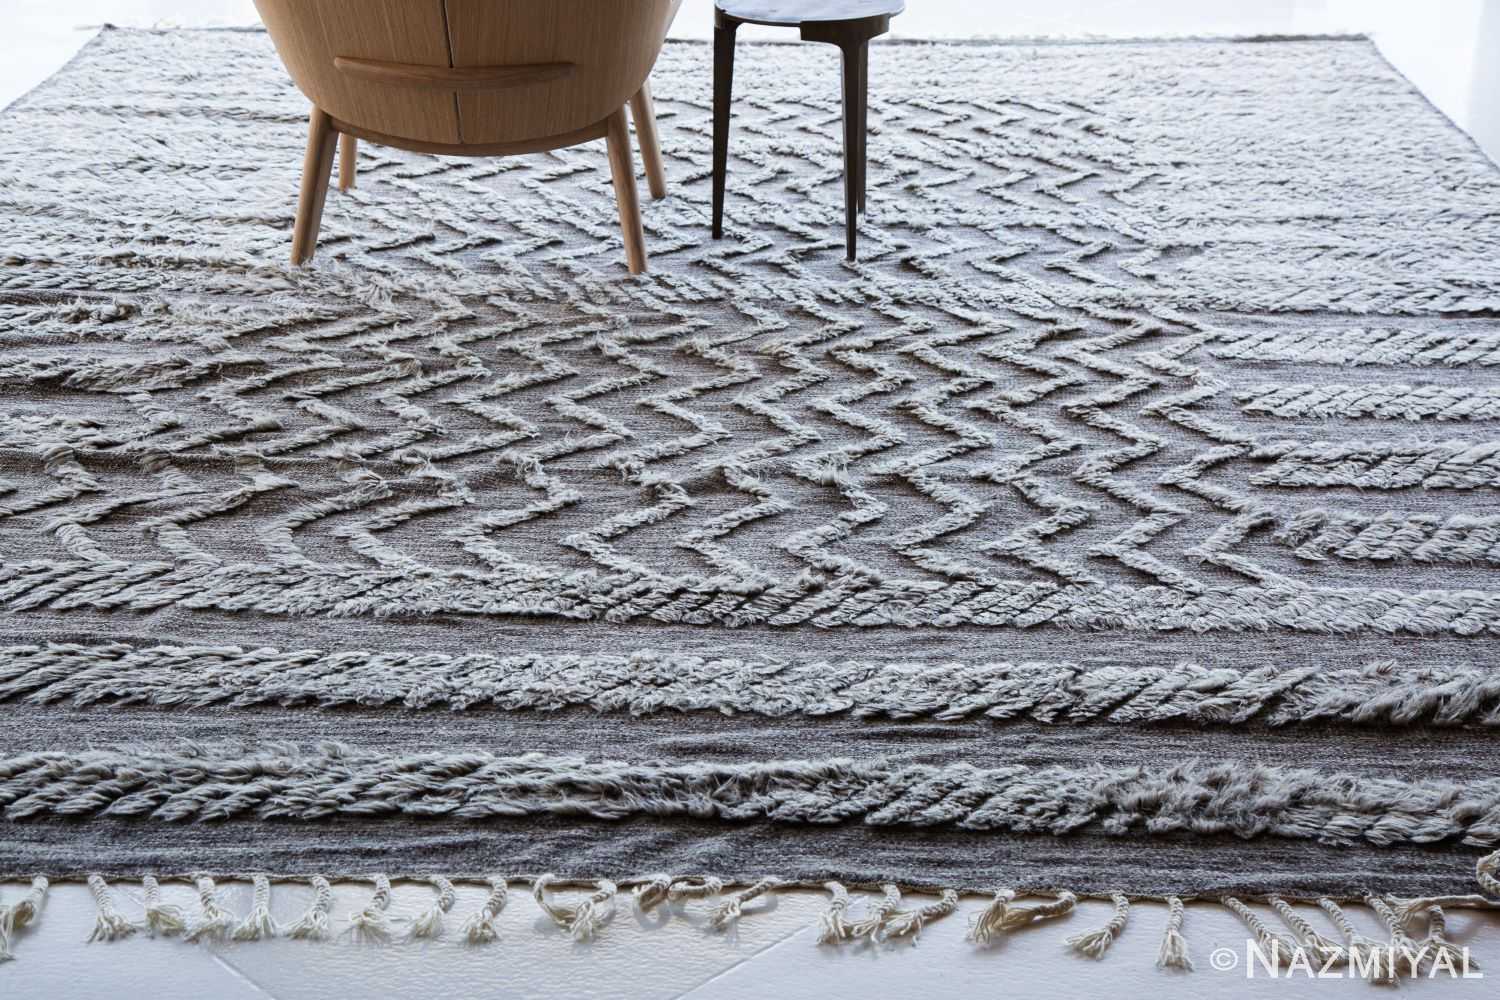 Edge Of Modernist Collection Rug 172785866 by Nazmiyal NYC